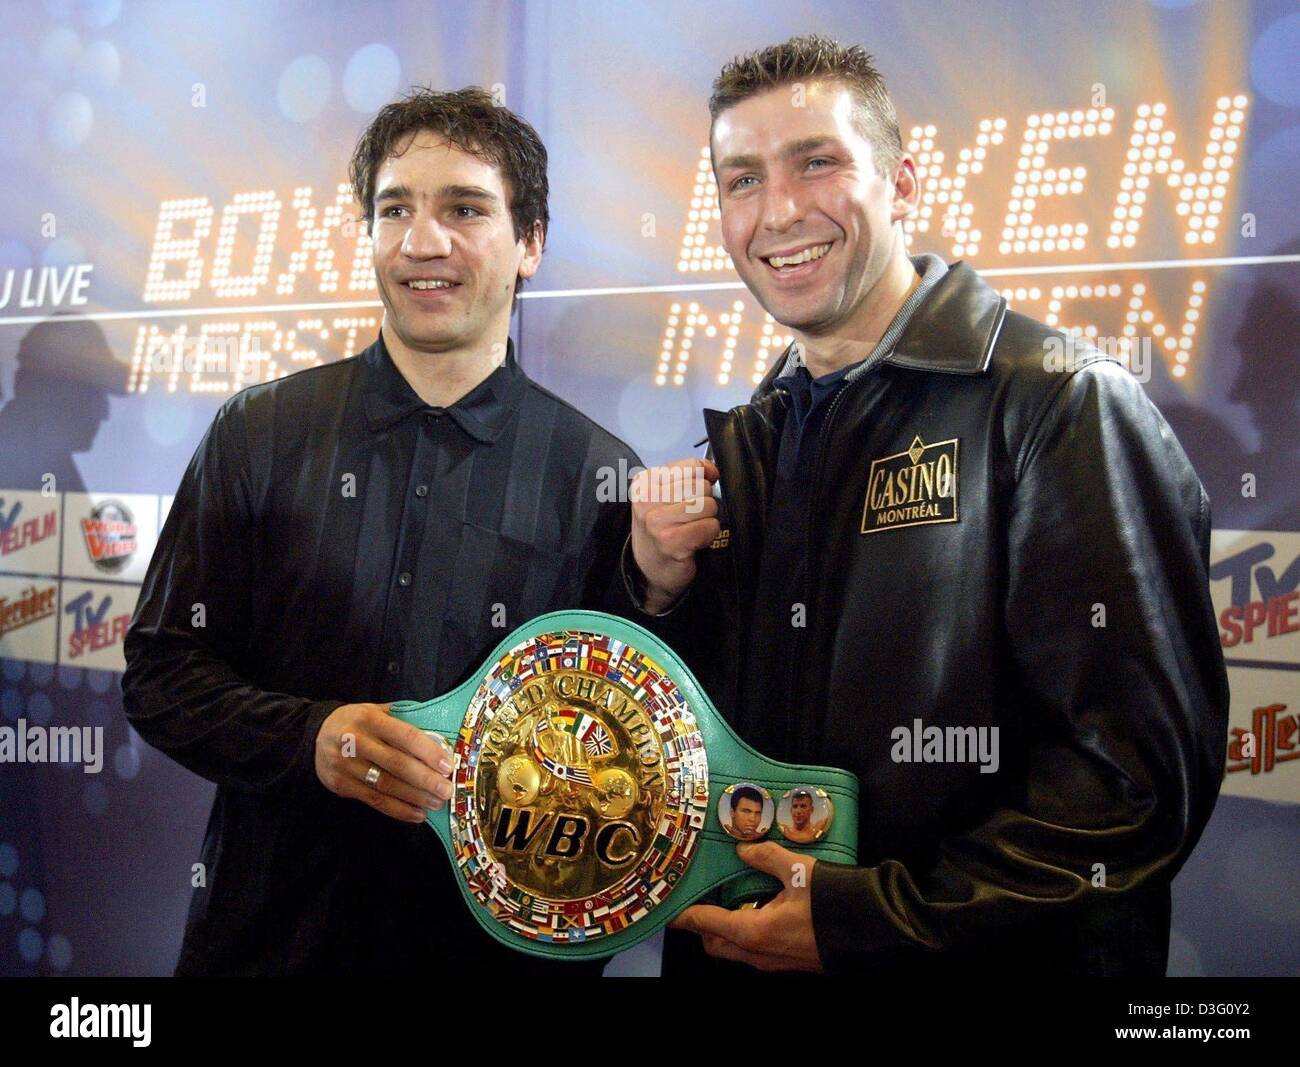 (dpa) - German boxer Markus Beyer (L) and Canadian boxer Eric Lucas present the world champions belt and pose for a publicity shot next to each other during a press conference in Leipzig, Germany, 2 March 2003. Eric Lucas, the current world champion in super middleweight boxing. He will defend his title against the challenger German boxer Markus Beyer at the WBC (World Boxing Counc Stock Photo